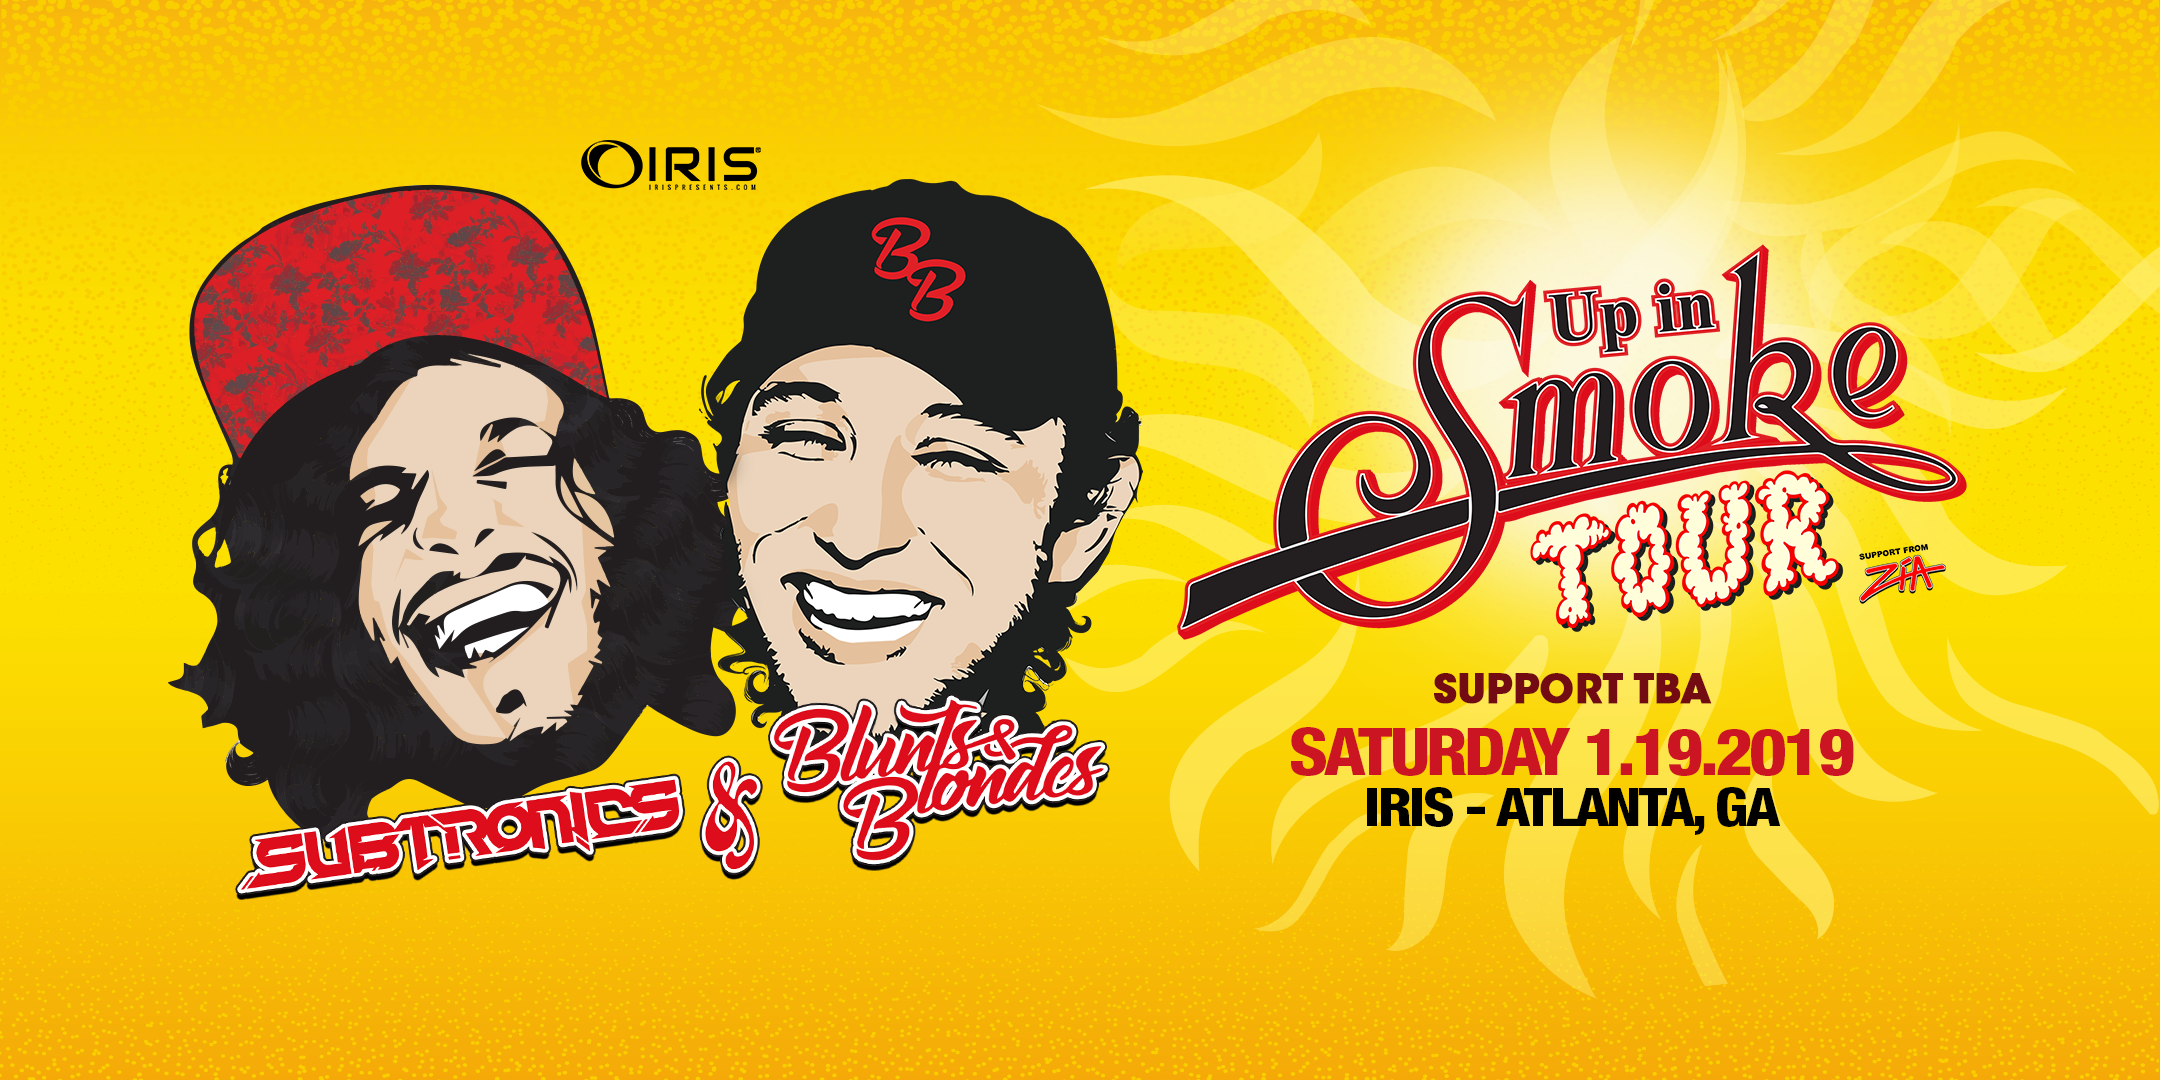 Subtronics and Blunts & Blondes - Up in Smoke Tour Hits Atlanta